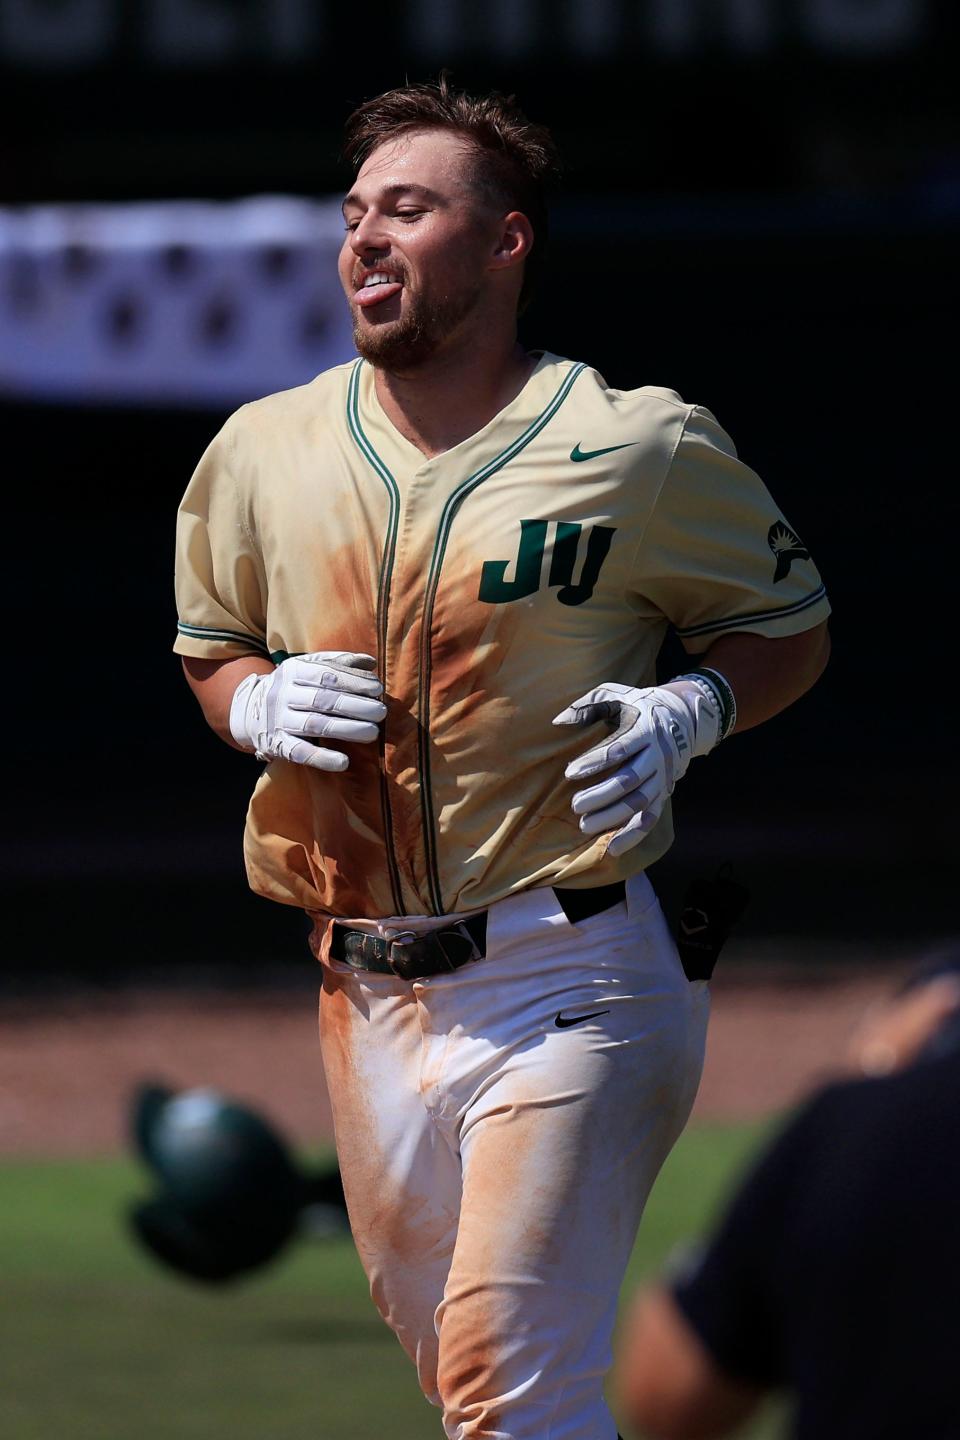 Jacksonville University senior Blake DeLamielleure led the Dolphins in hitting last season but went out for the year with a hip injury in the second game.